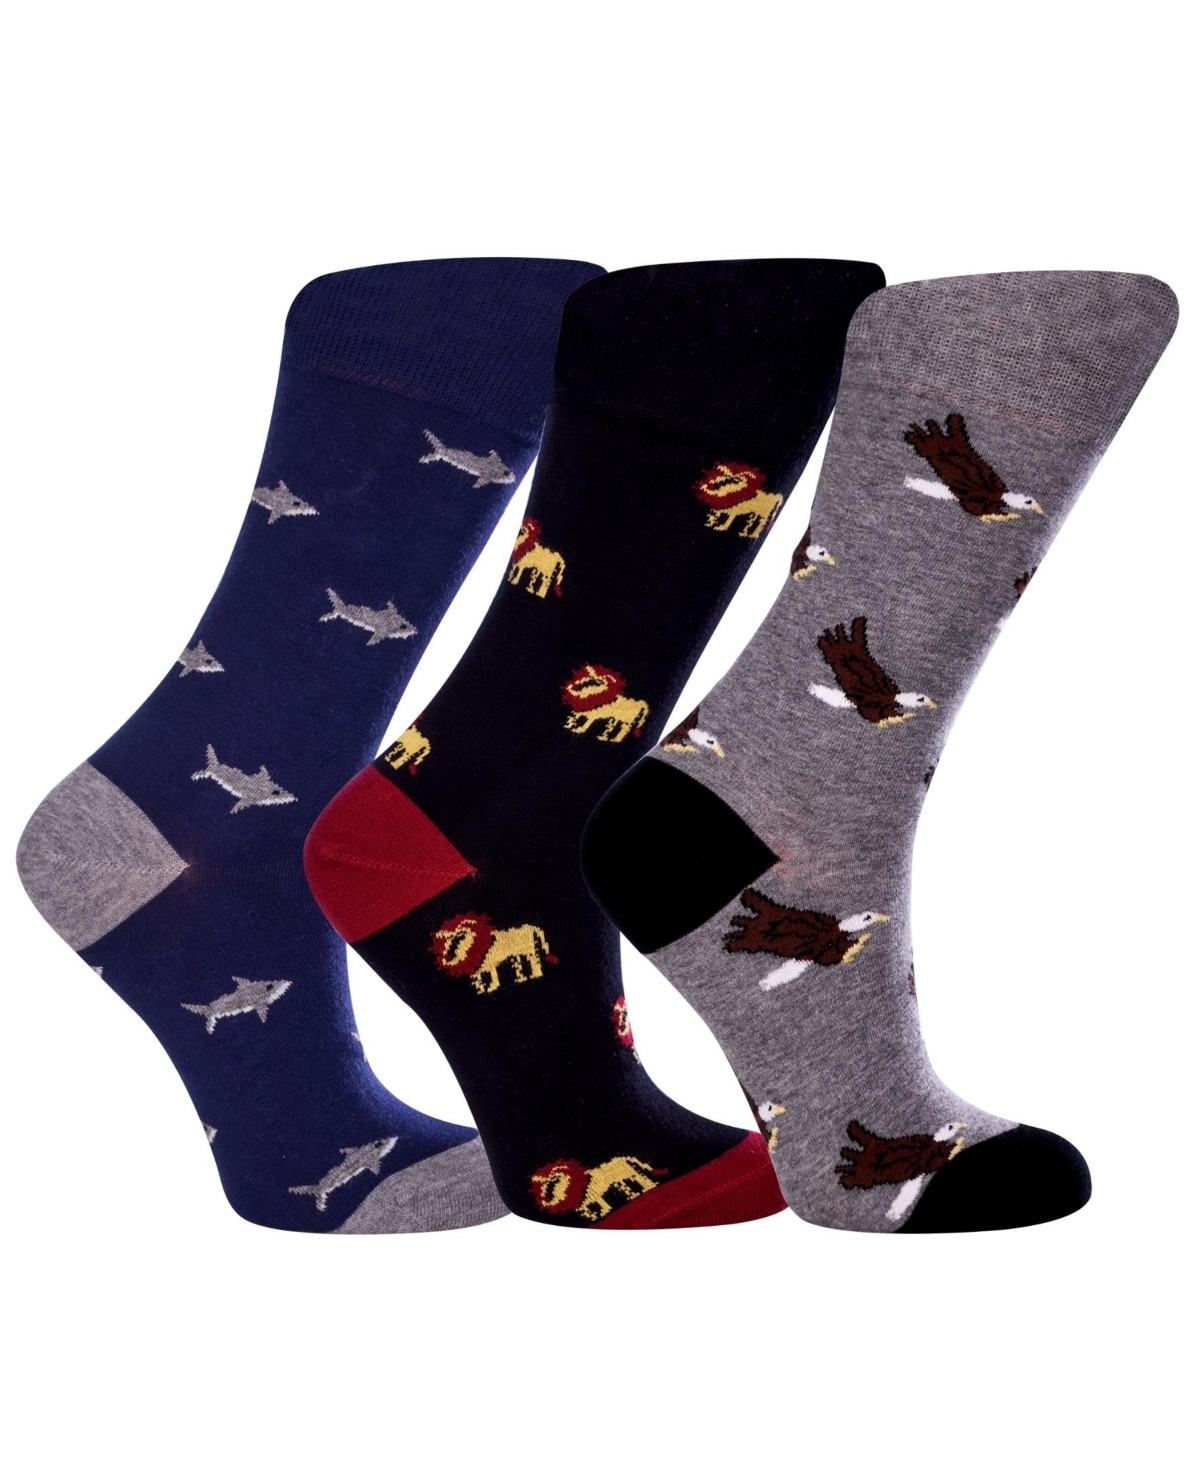 Women's Animal Kingdom Bundle W-Cotton Novelty Crew Socks with Seamless Toe Design, Pack of 3 - Multi Color